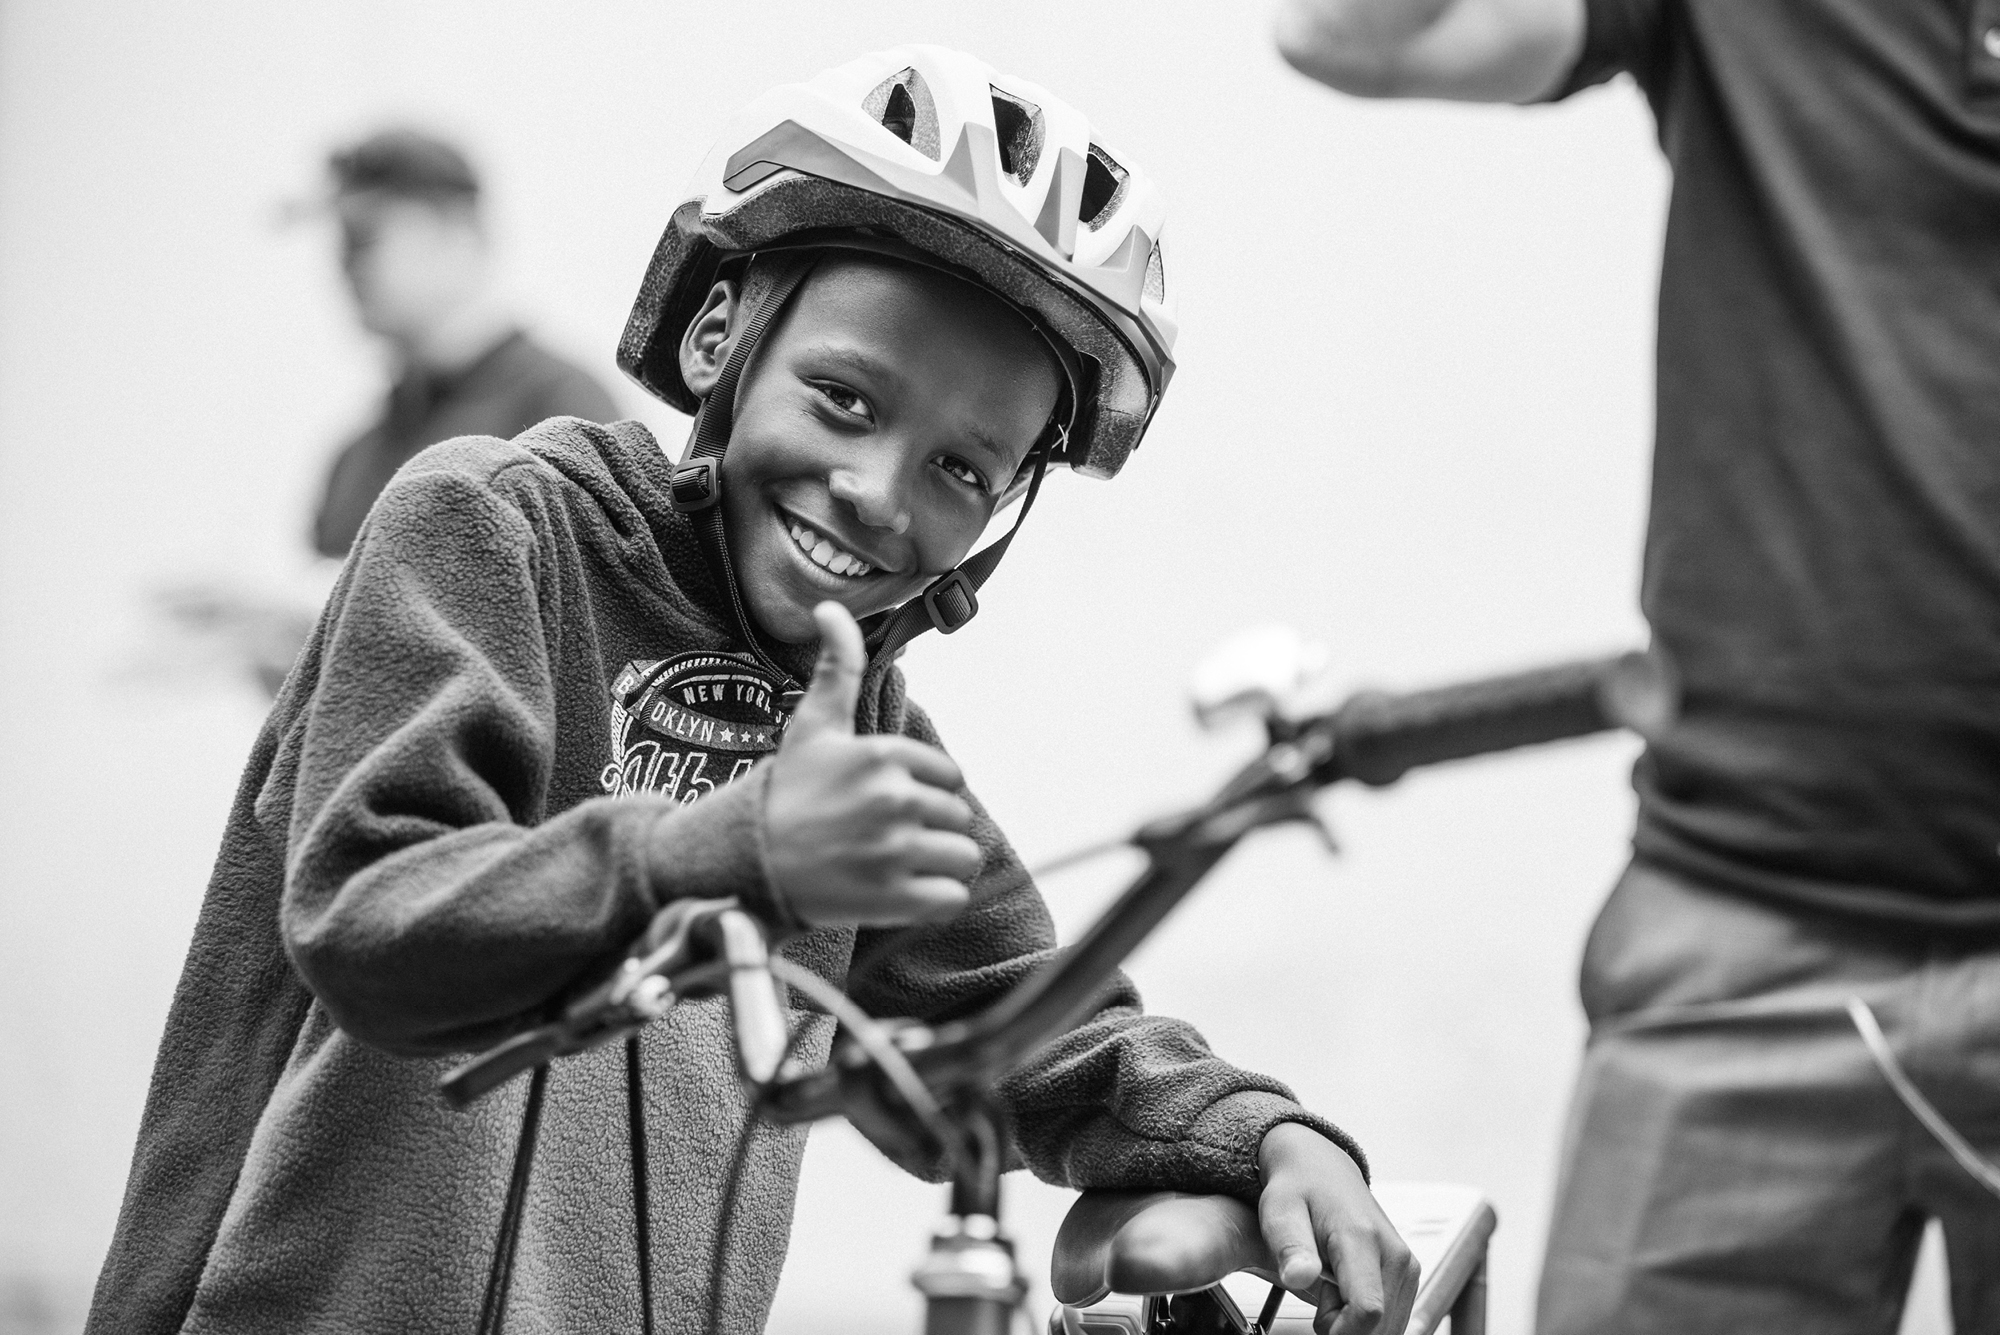 Qhubeka, a charity that manufactures and donates bicycles to high school children